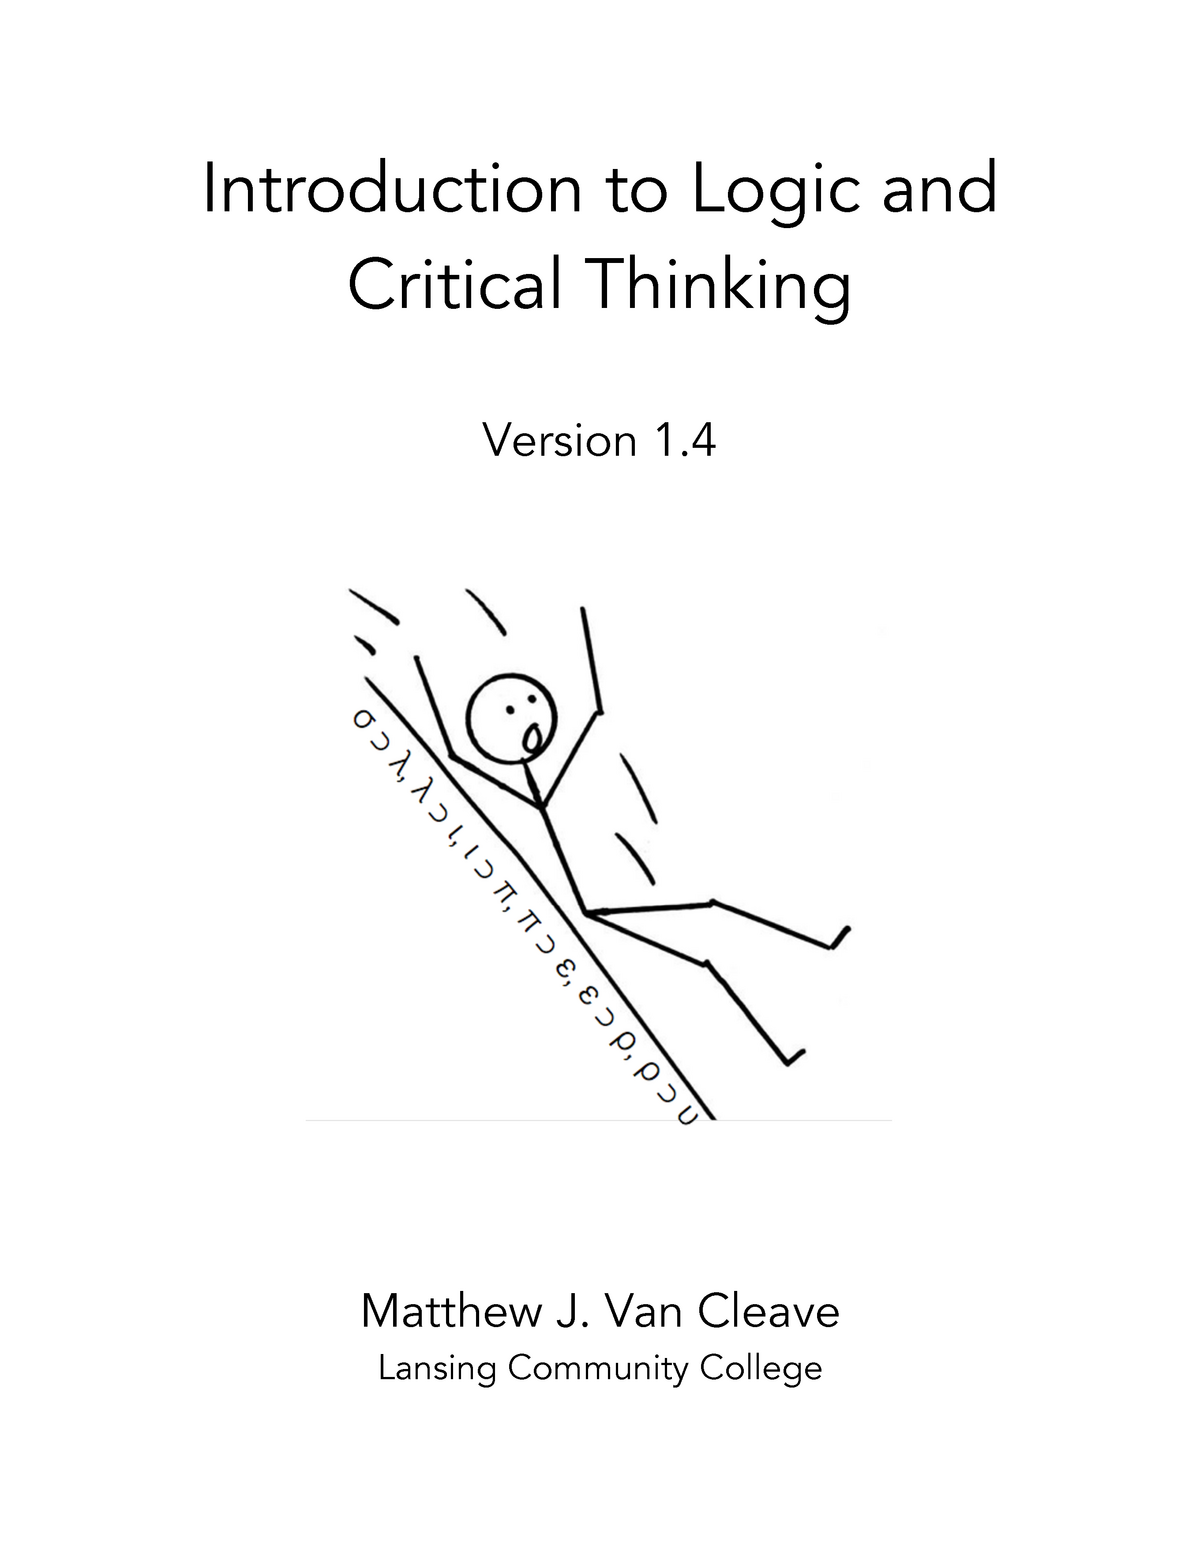 gst203 introduction to logic and critical thinking